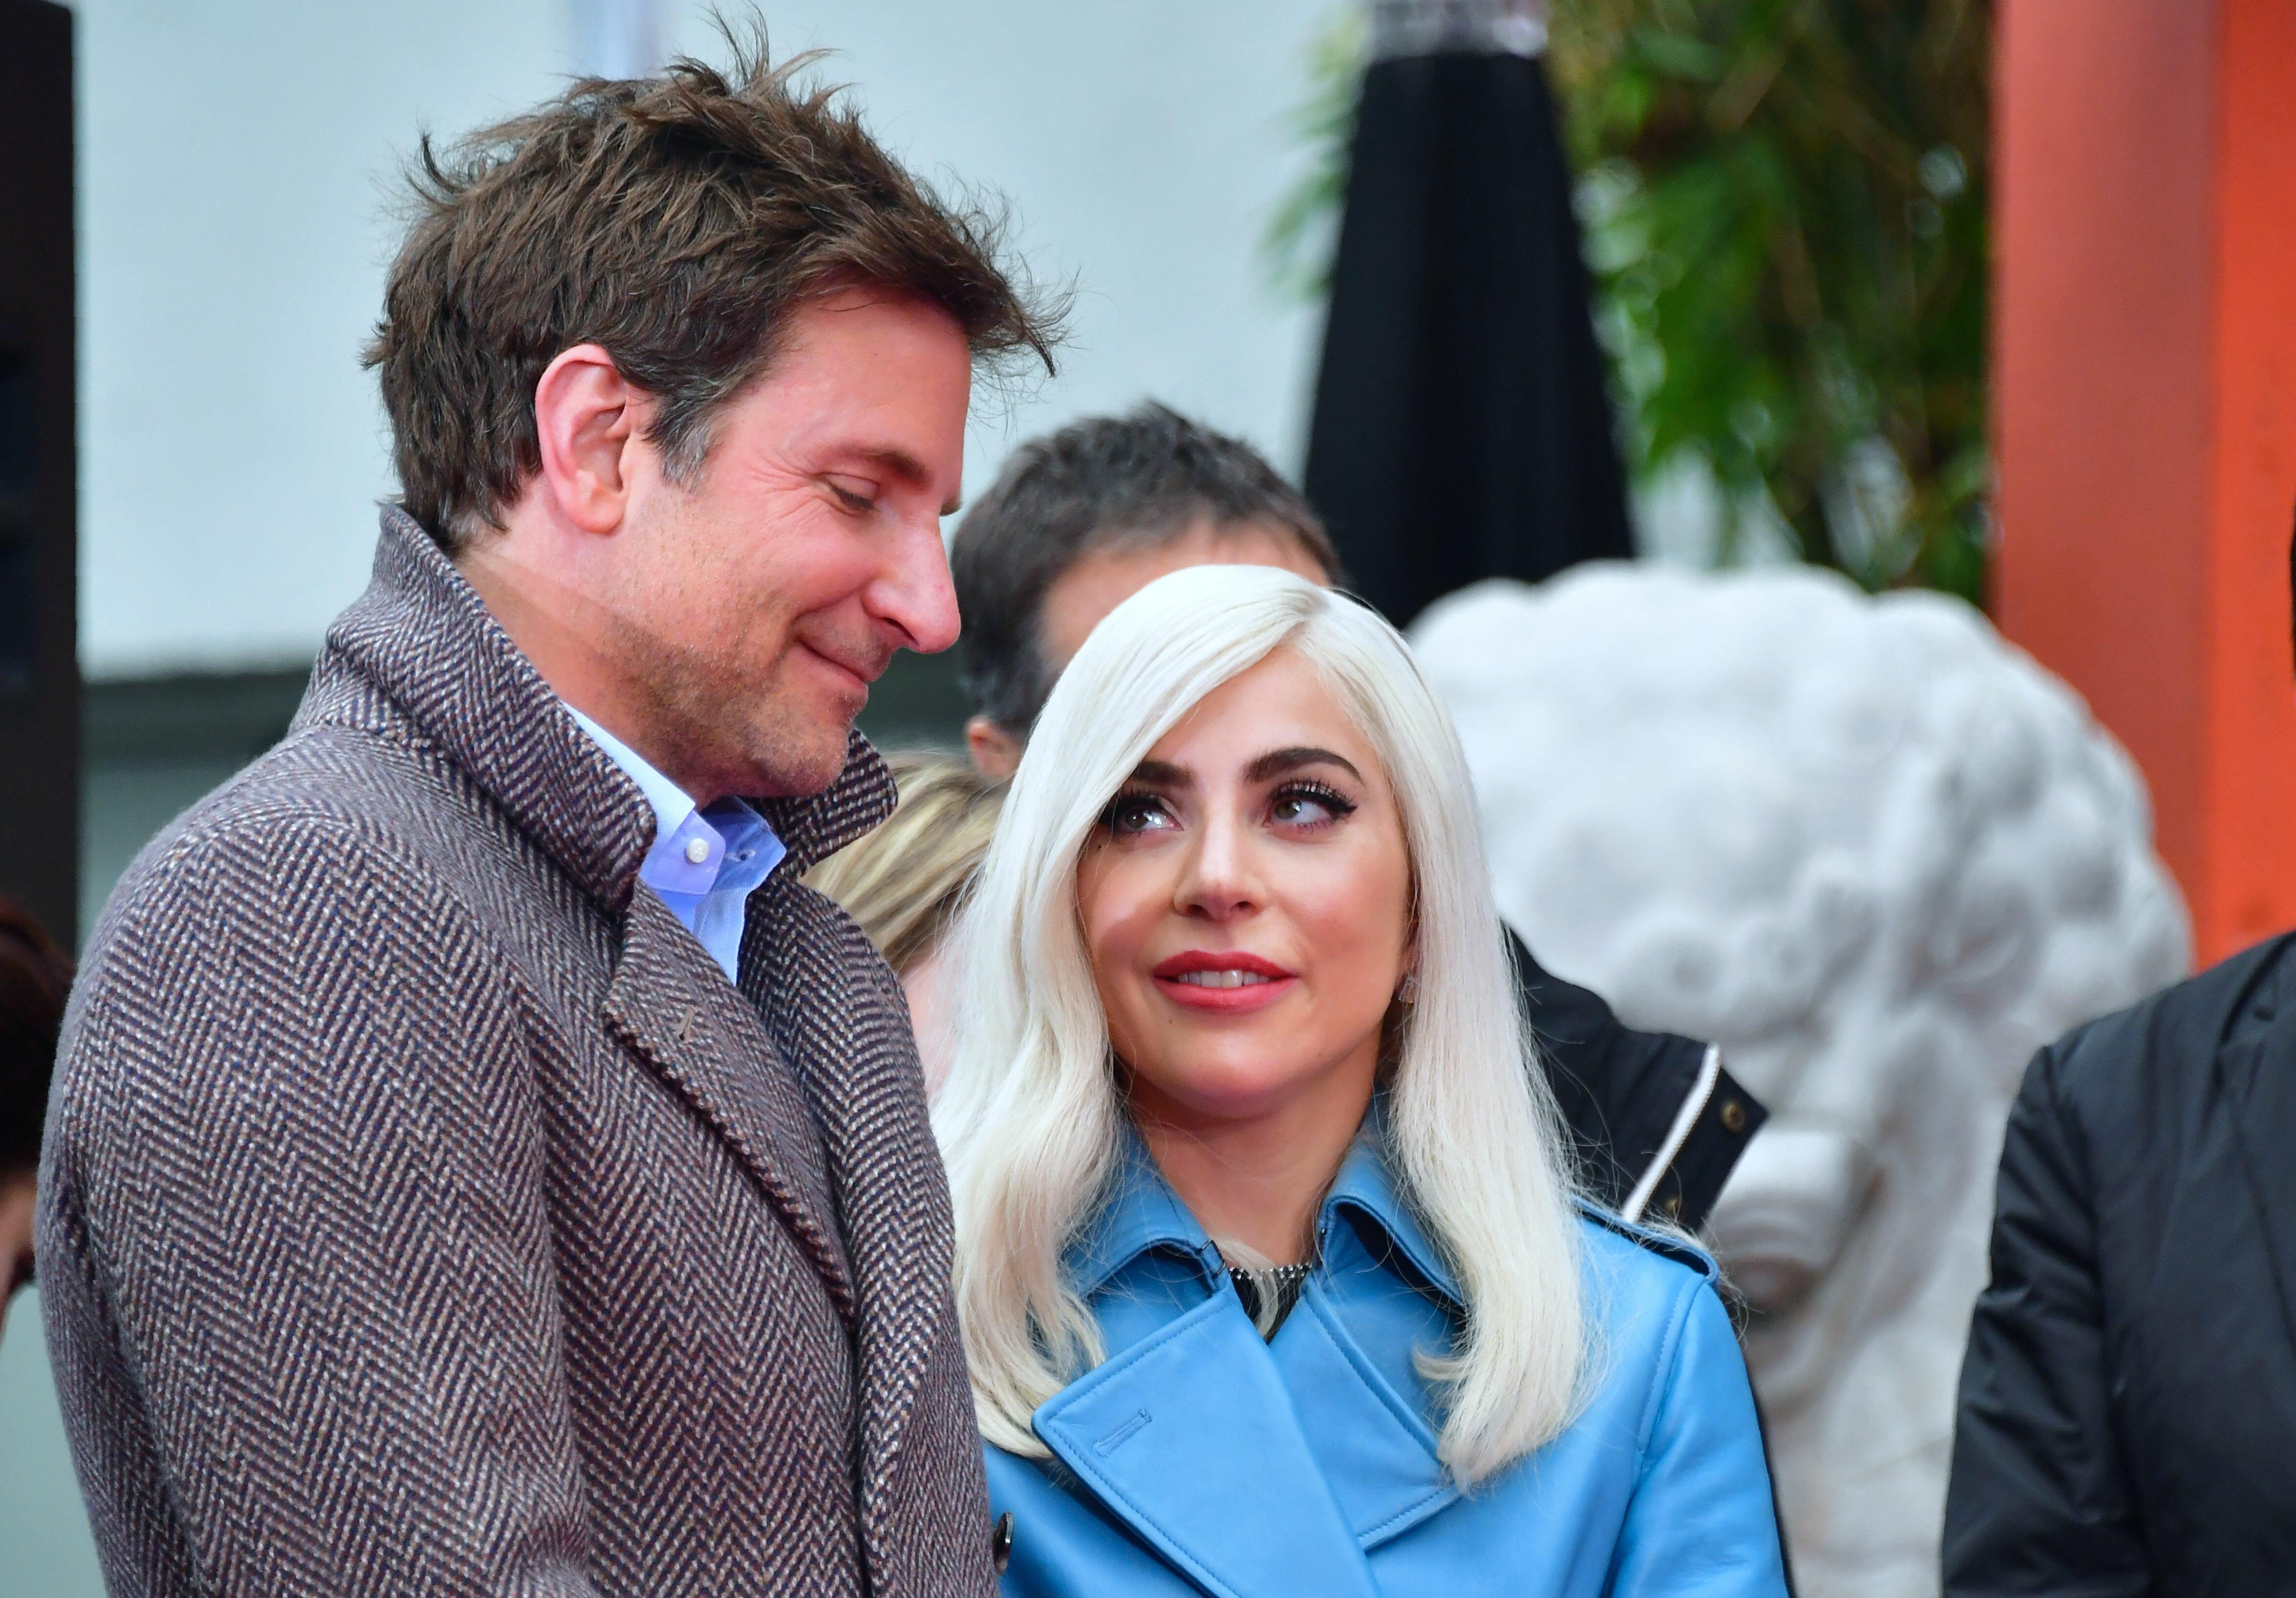 Lady Gaga Brings Bradley Cooper Onstage In Vegas Show To Sing "Shallow